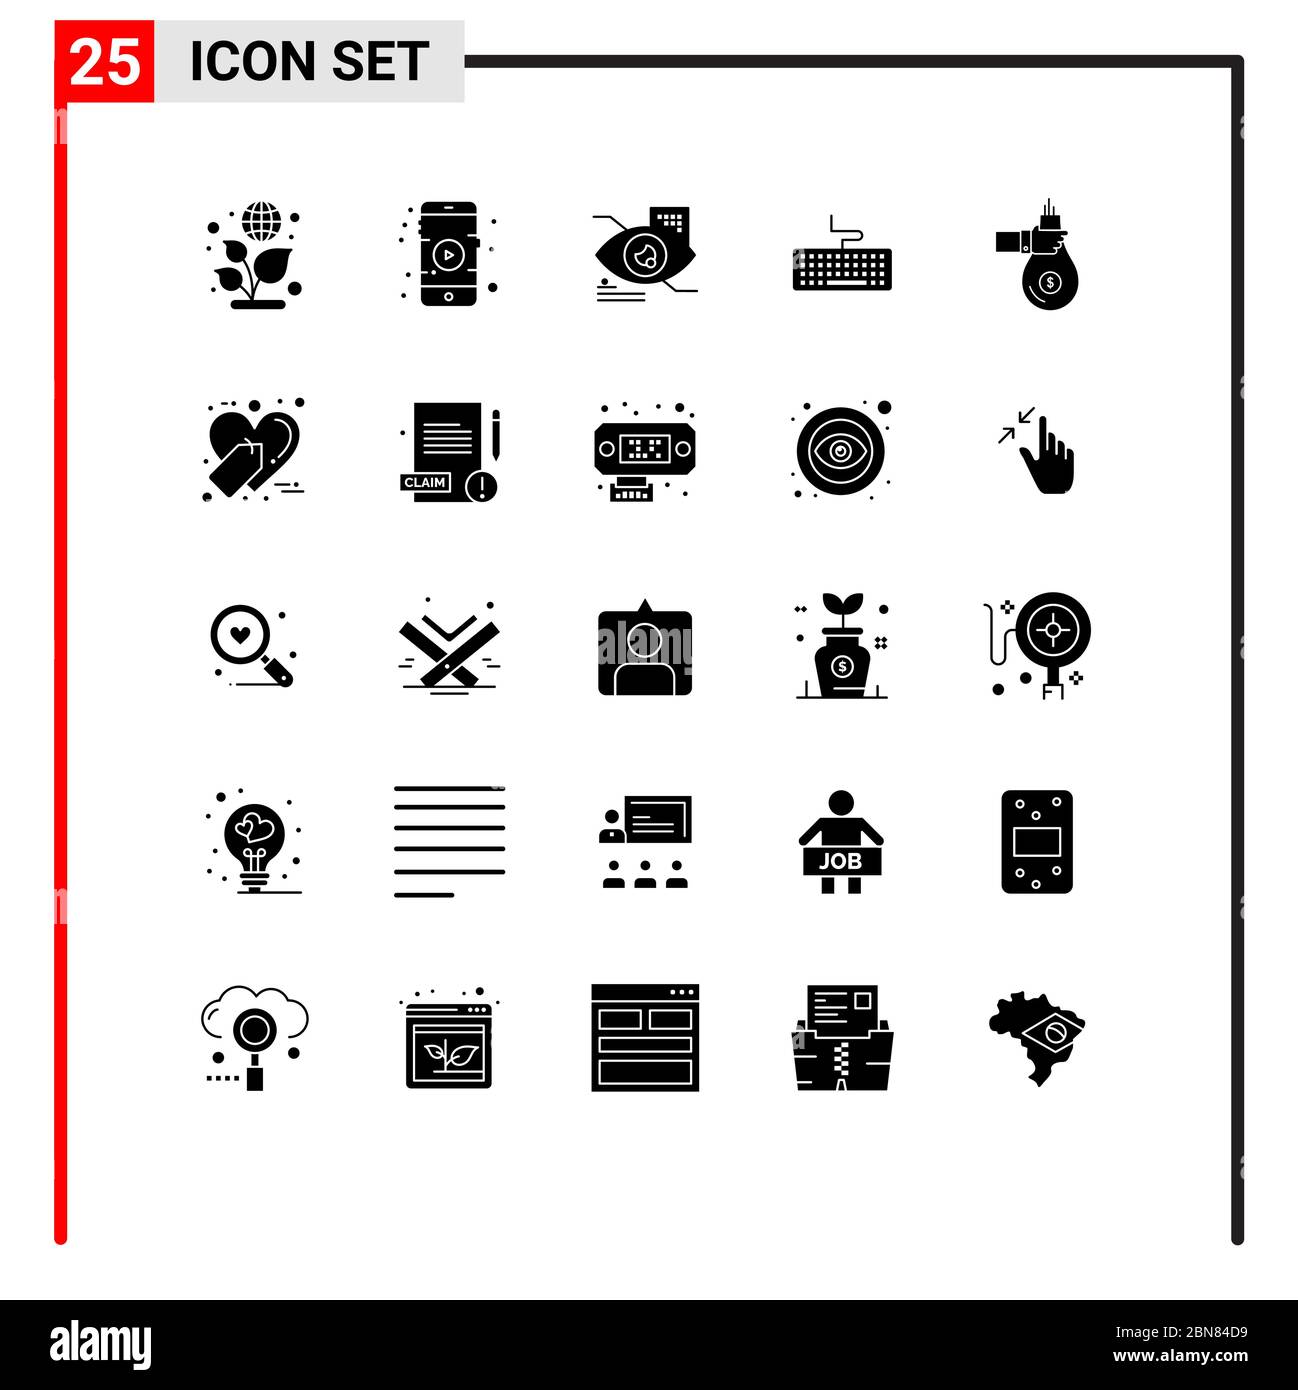 25 Creative Icons Modern Signs and Symbols of investment, finance, eyetap, bag, hardware Editable Vector Design Elements Stock Vector